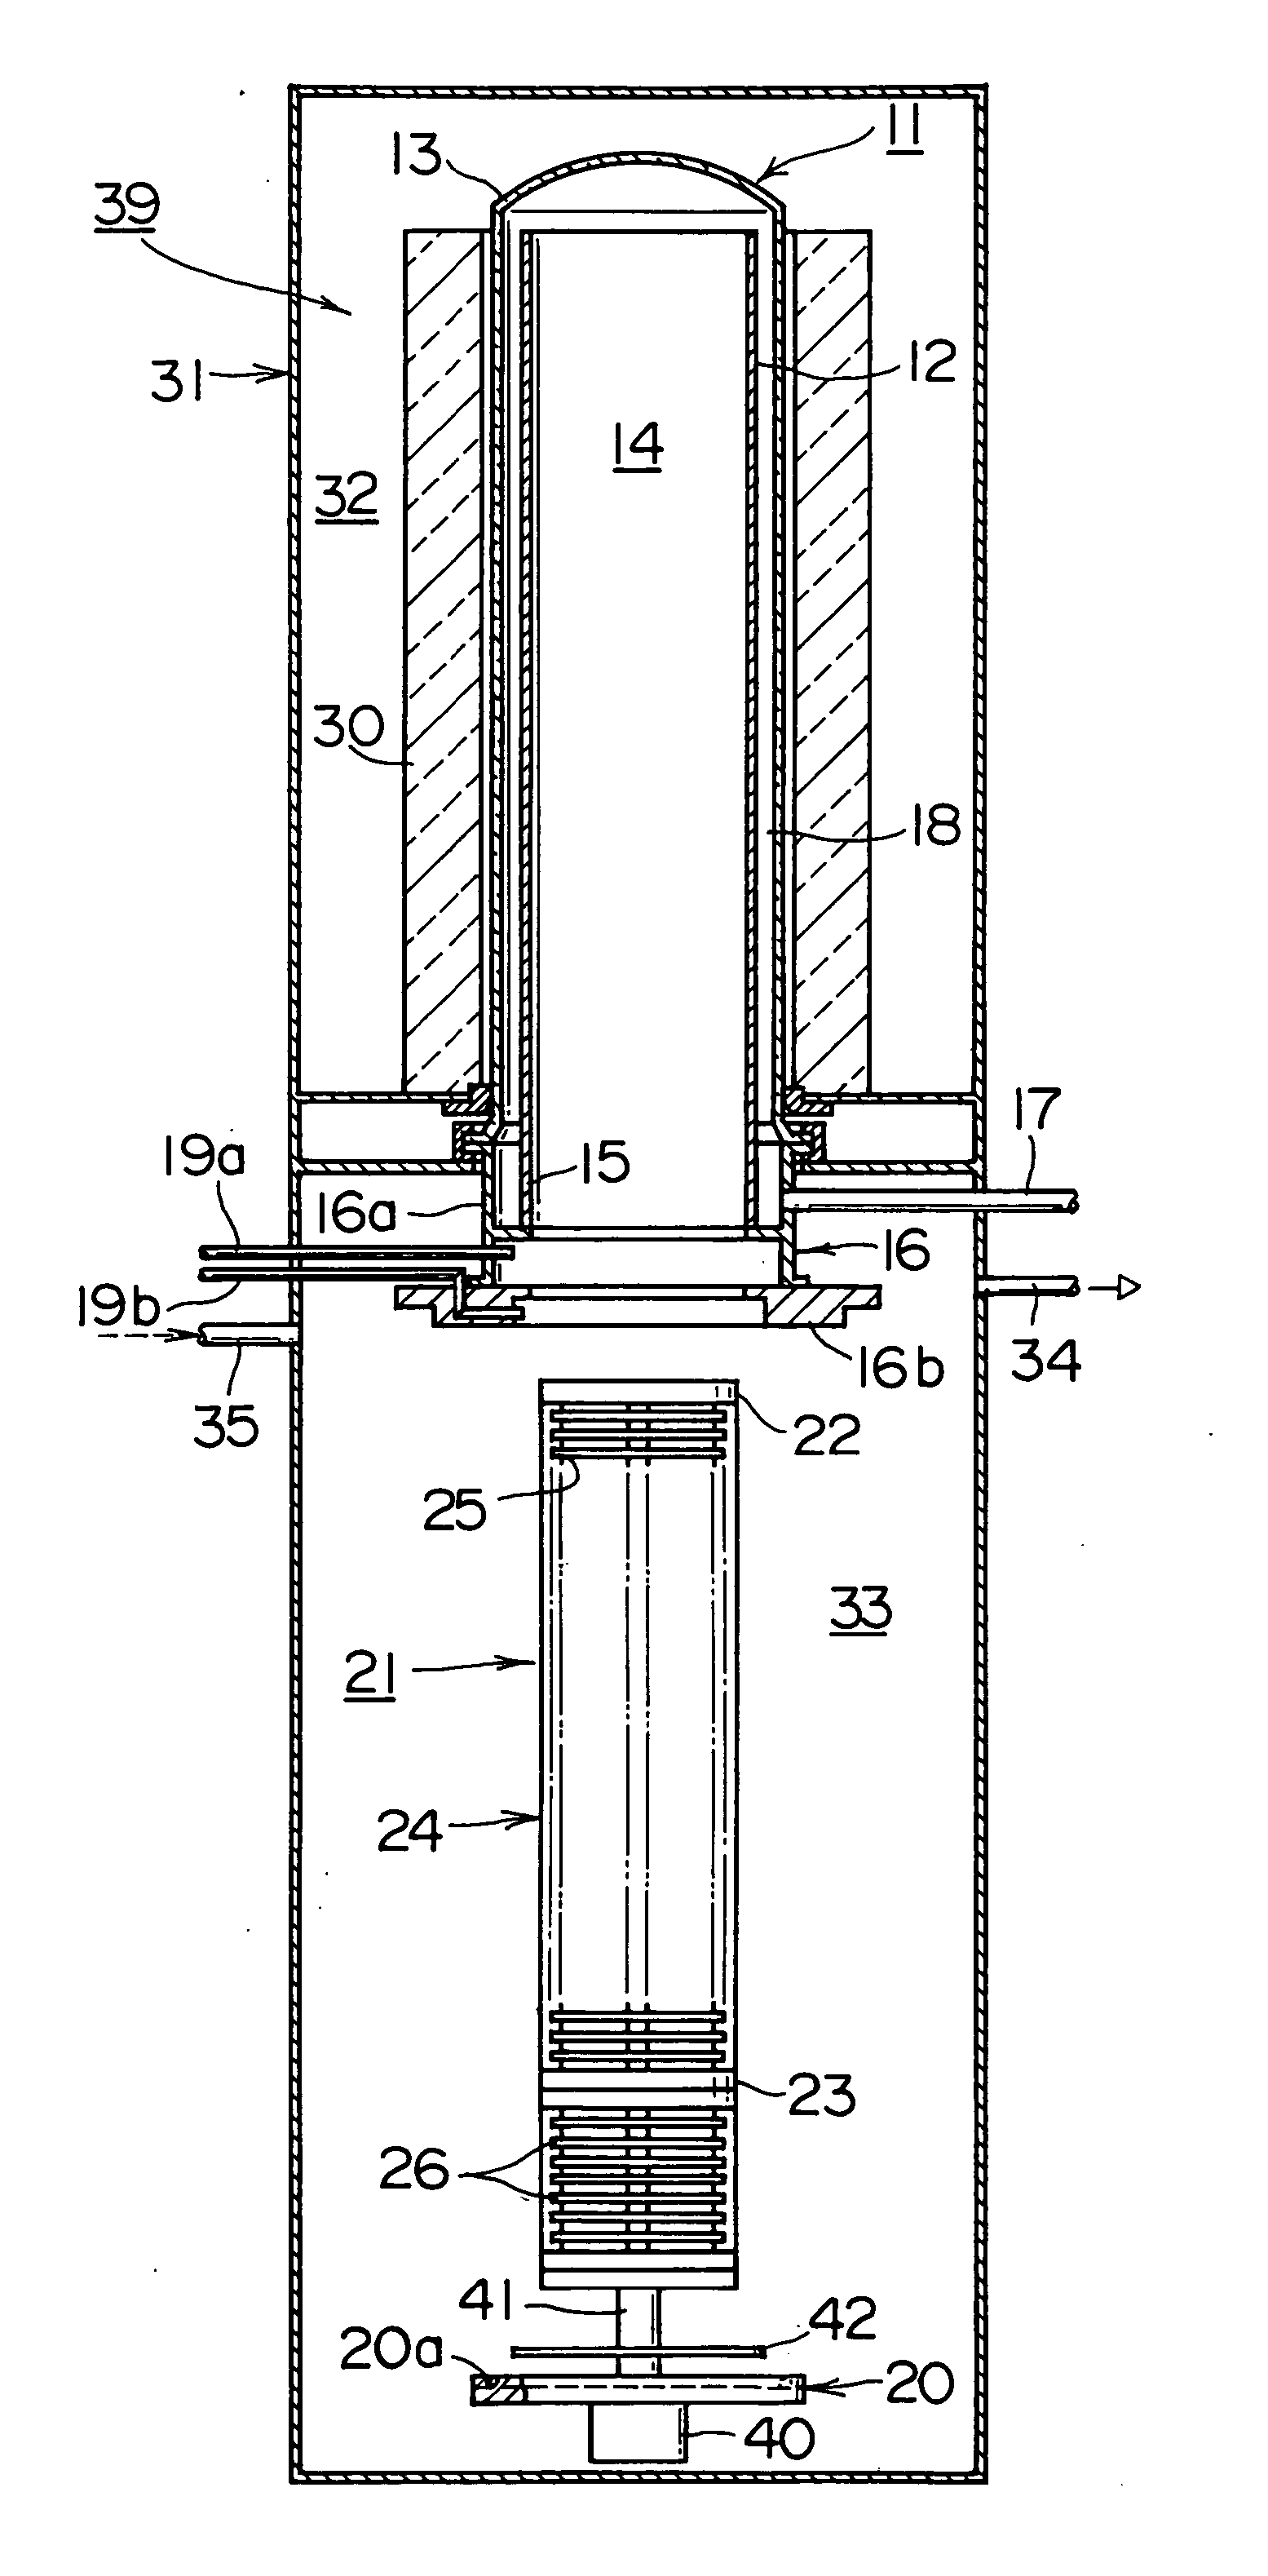 Substrate-processing apparatus and method of producing a semiconductor device